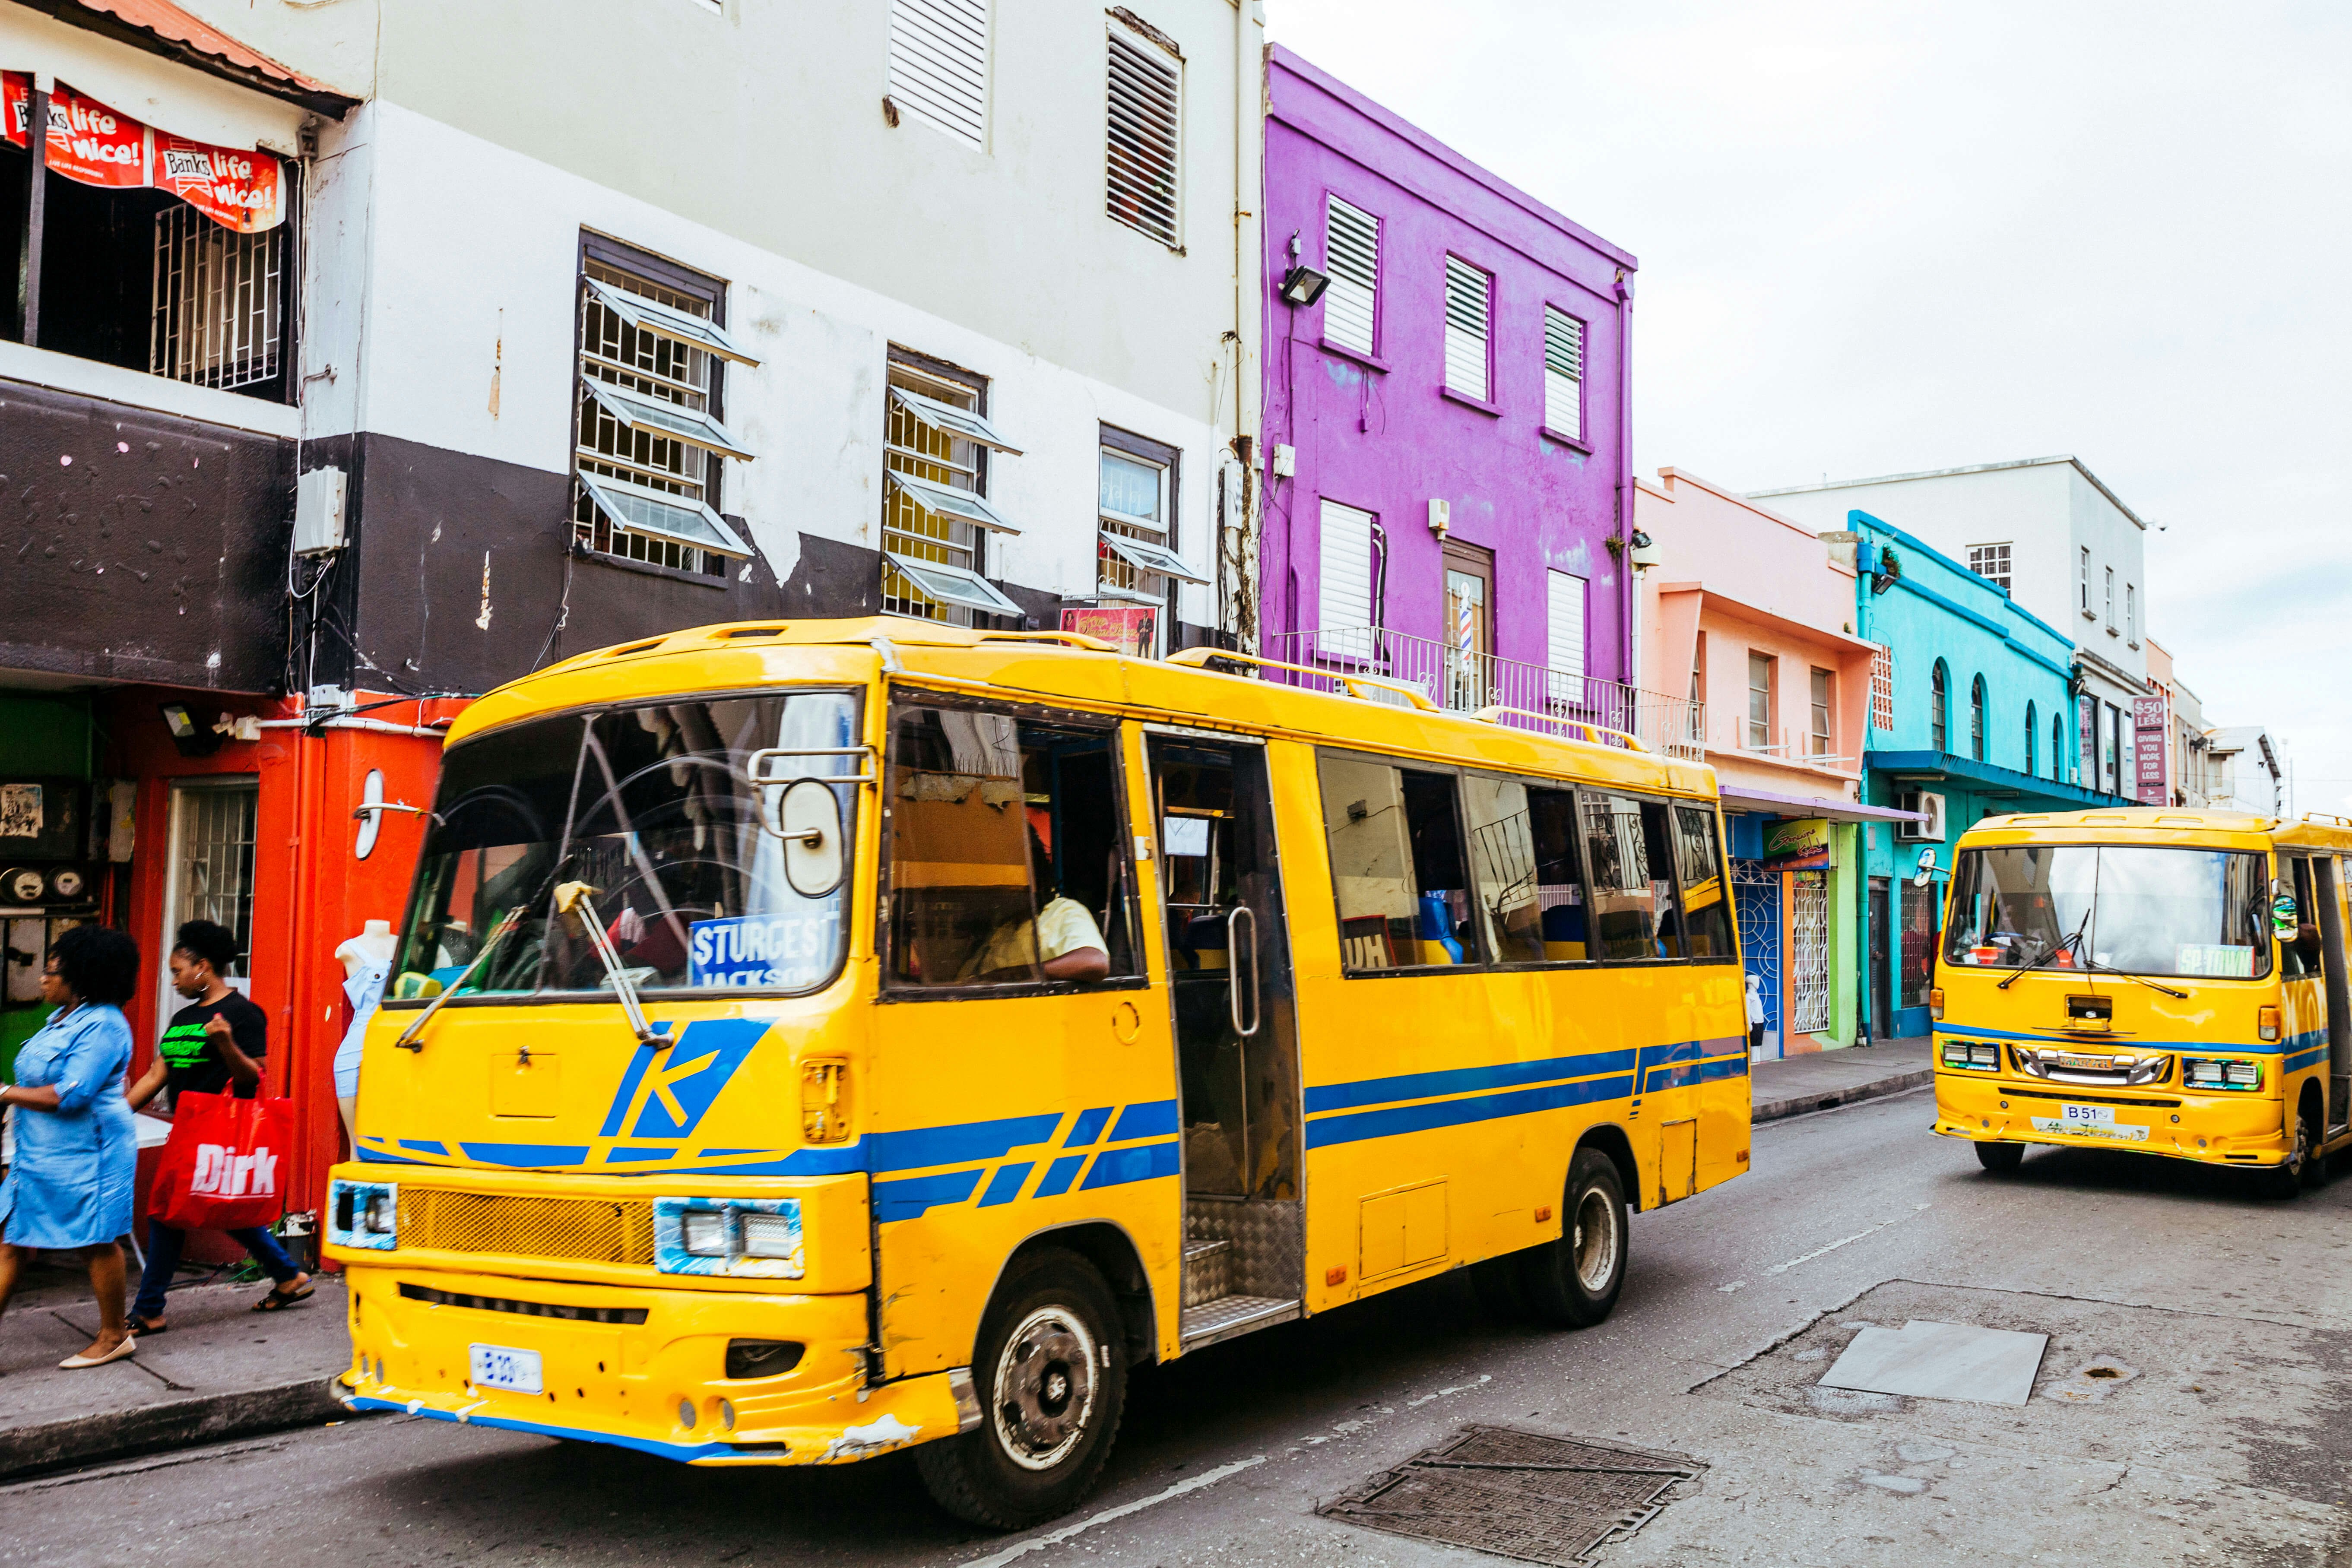 Everyday traffic scene with local yellow buses in the streets of old Bridgetown, Barbados